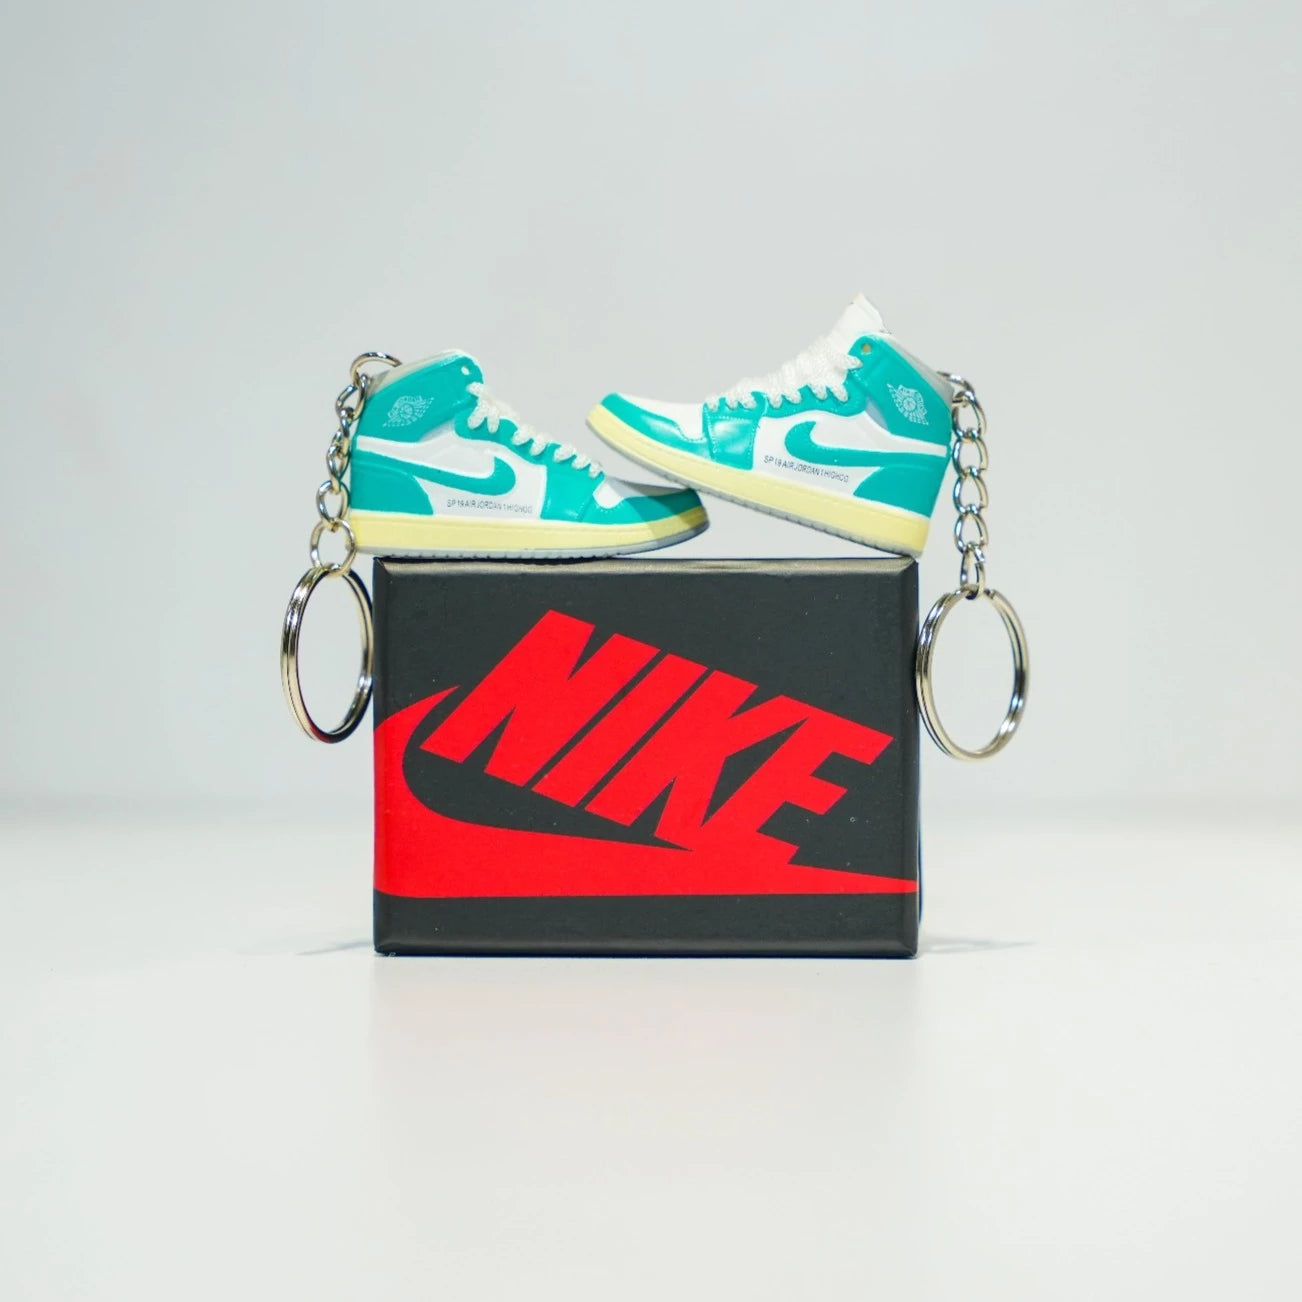 3D Sneaker Keychain With Box - Turbo Green